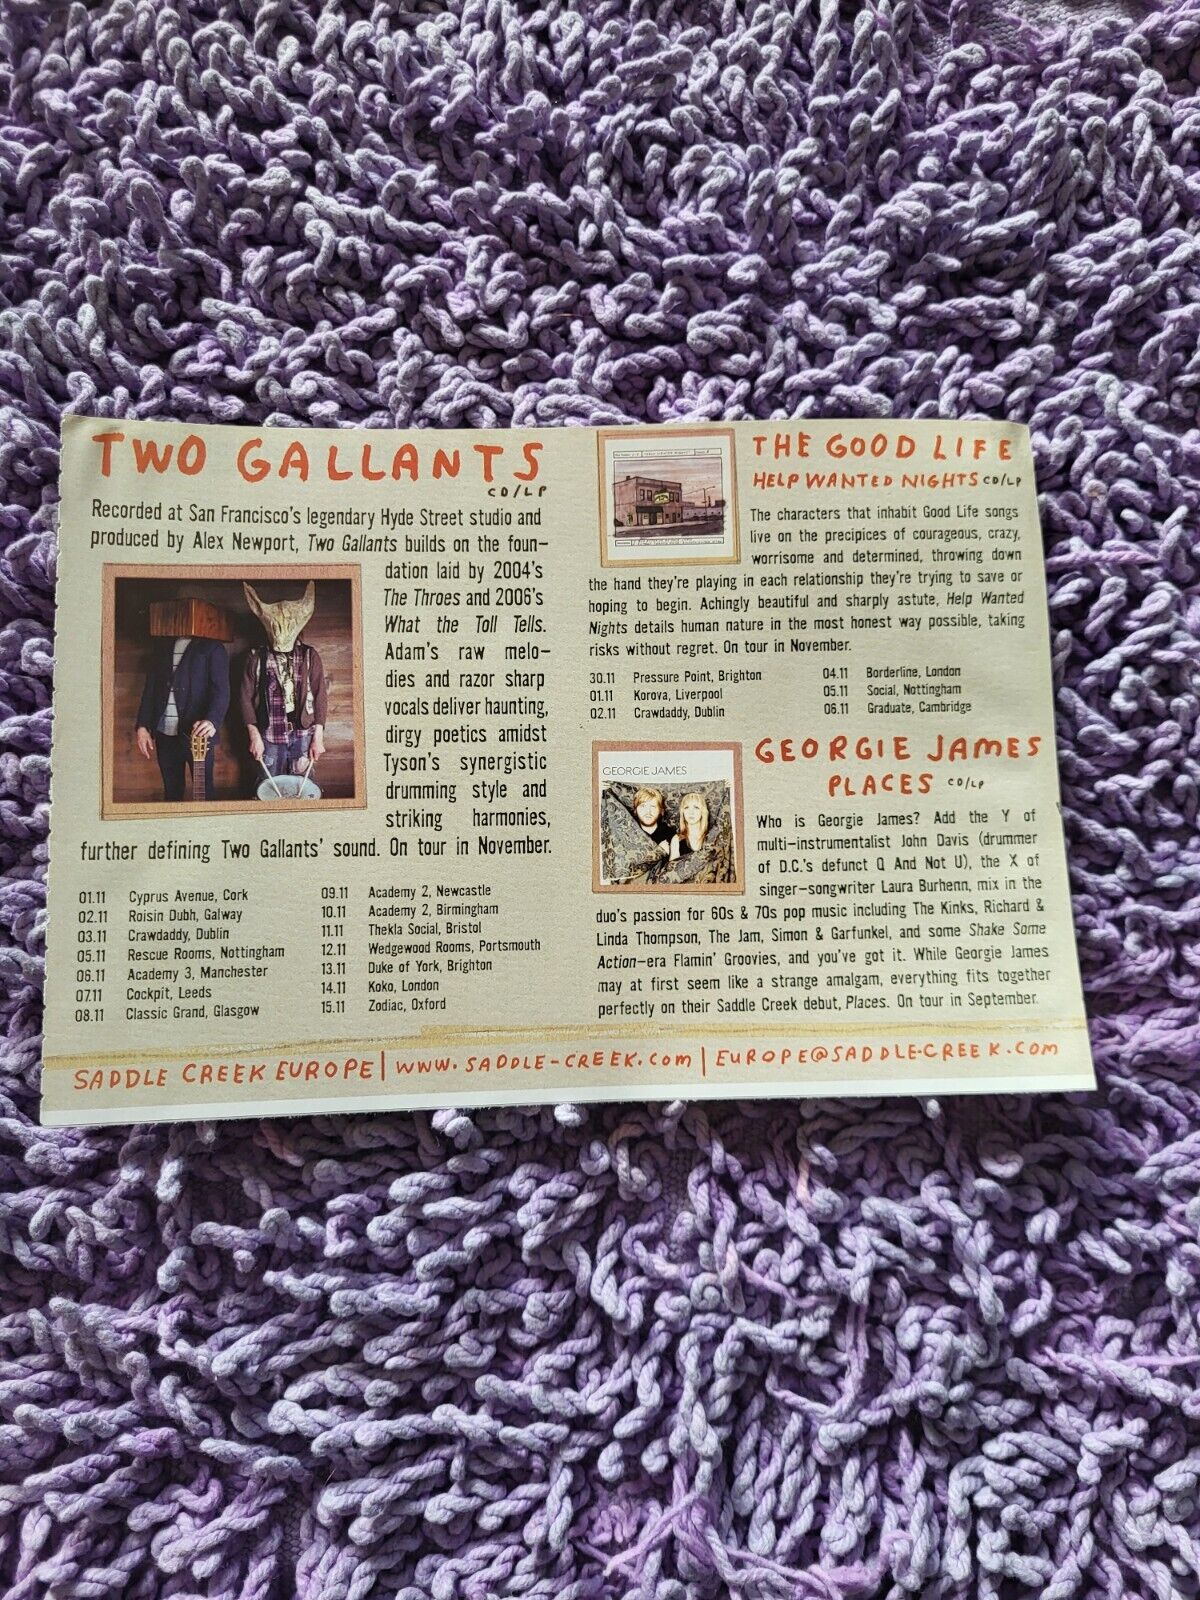 TPGM28 ADVERT 5X8 SADDLE CREEK EUROPE - TWO GALLANTS. GEORGE JAMES PLACES